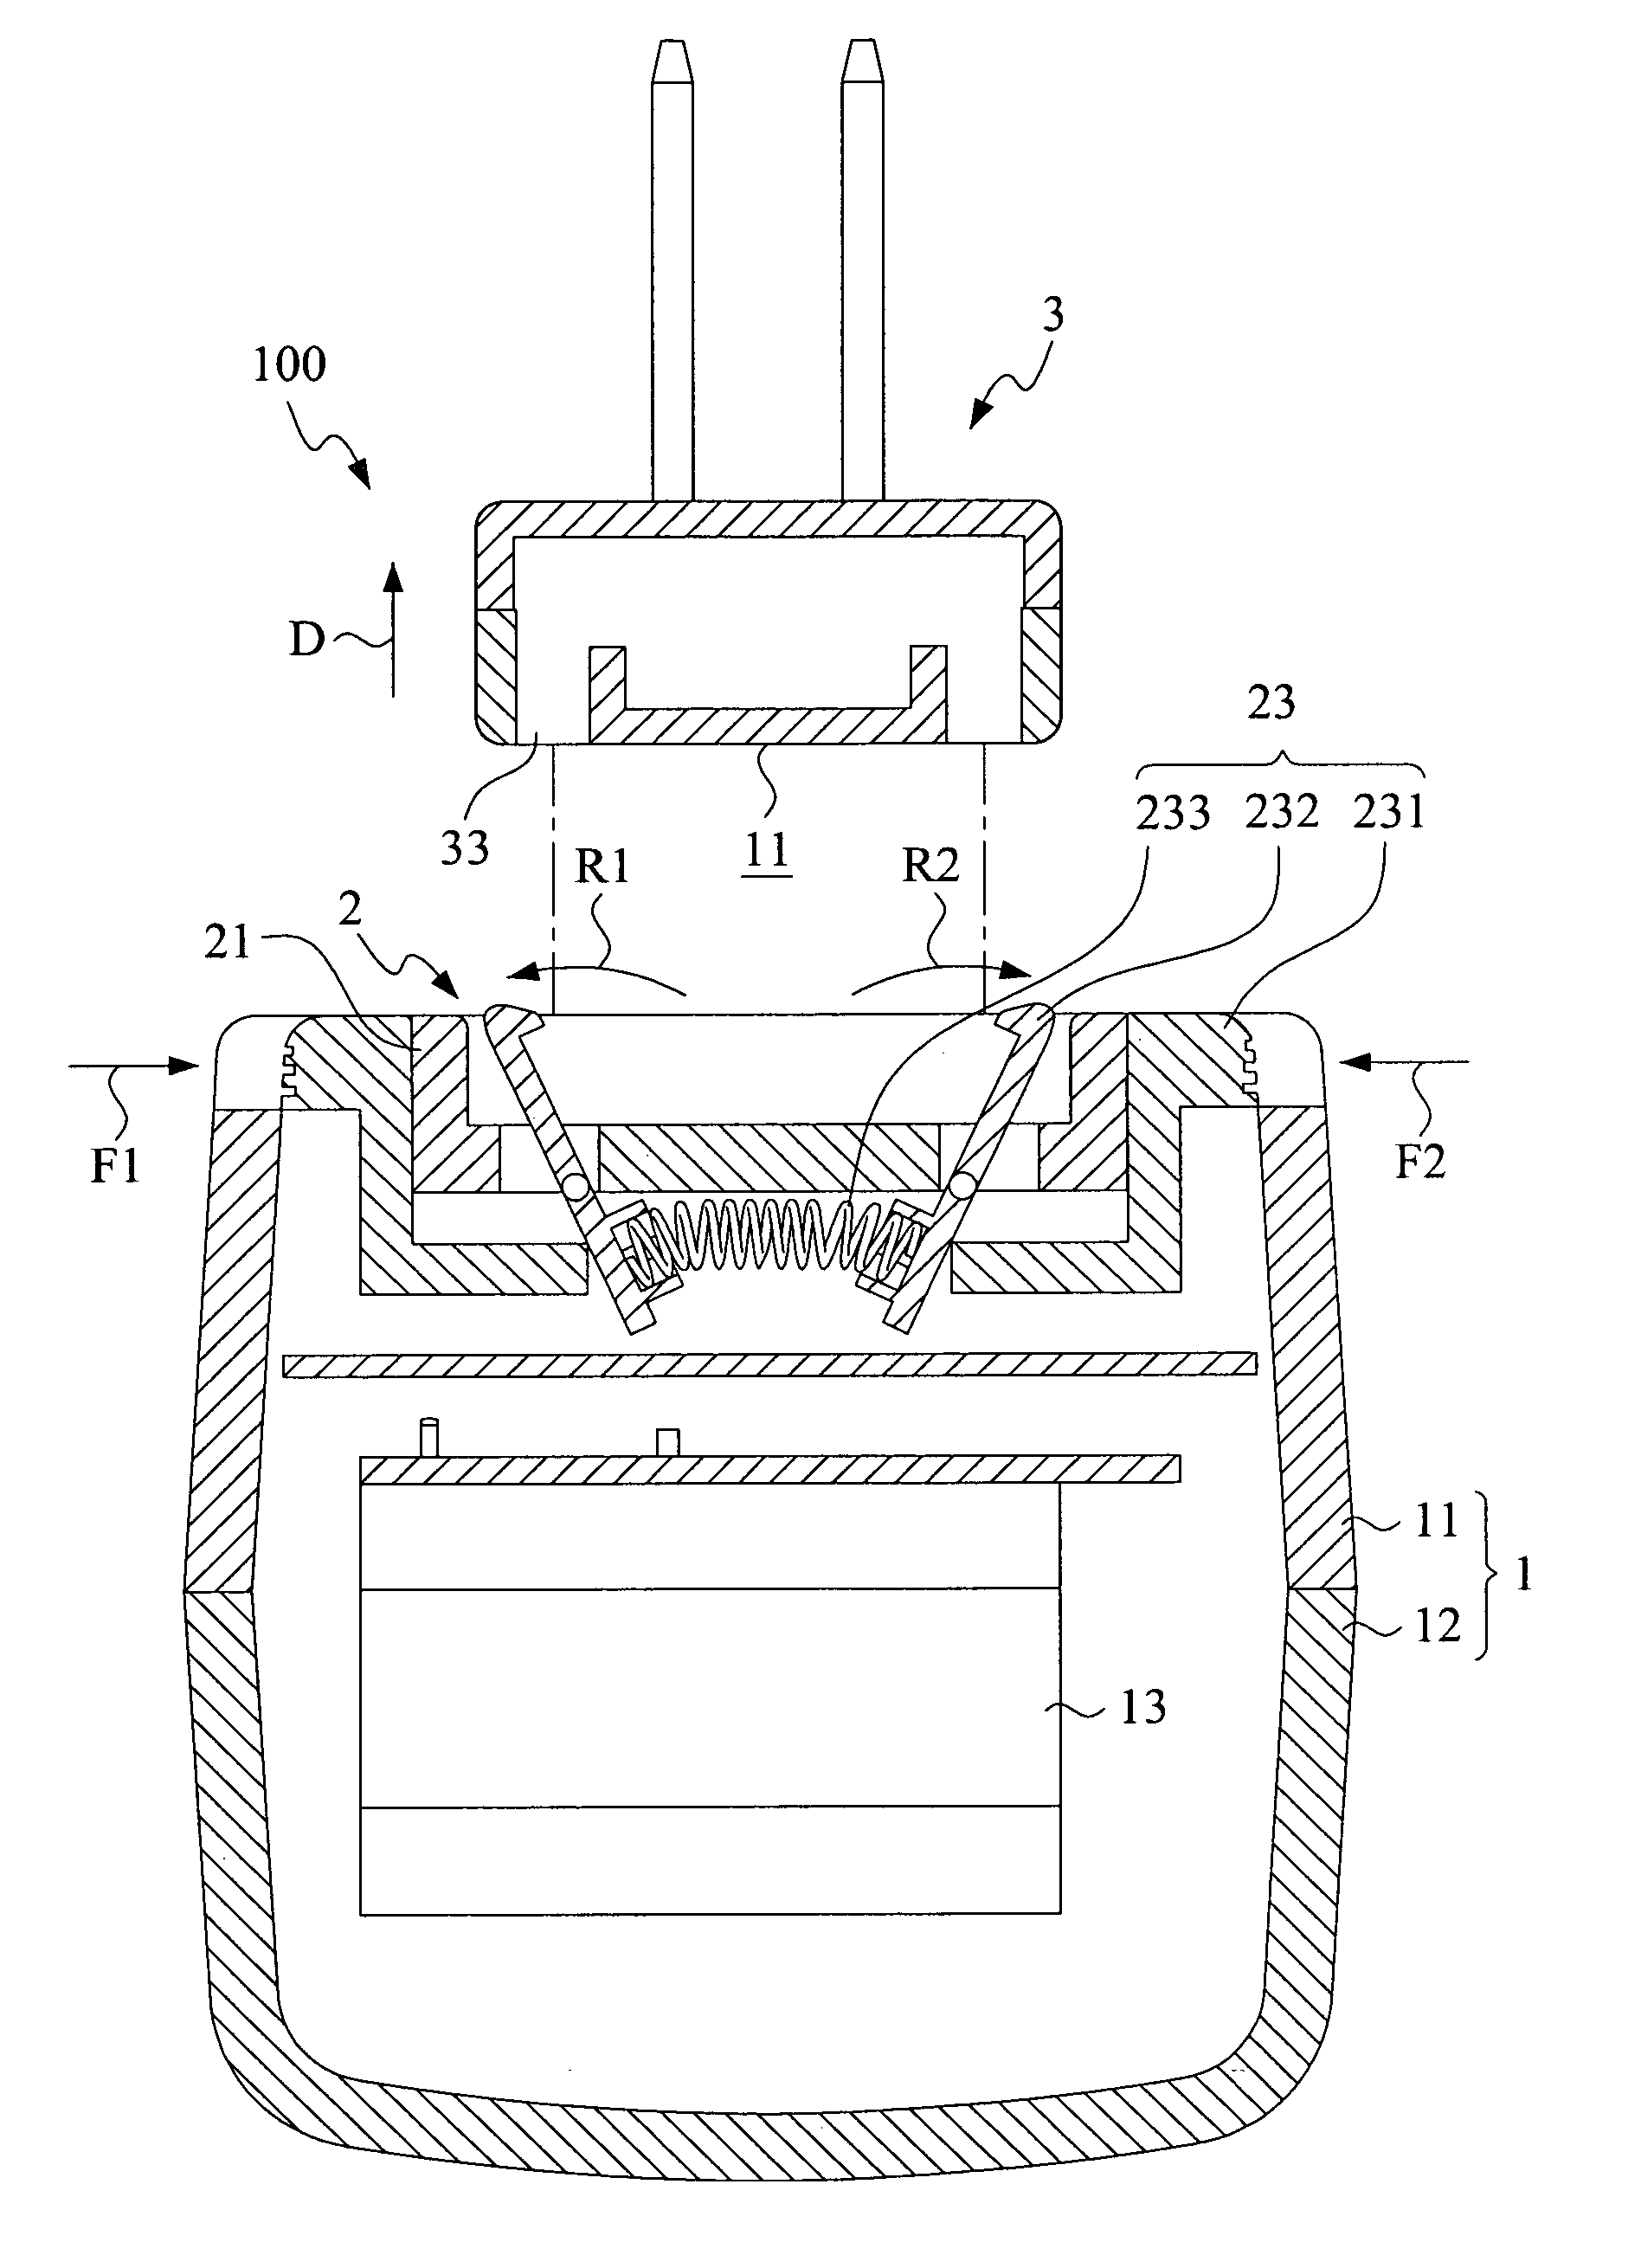 Electrical adapted with replaceable plug structure